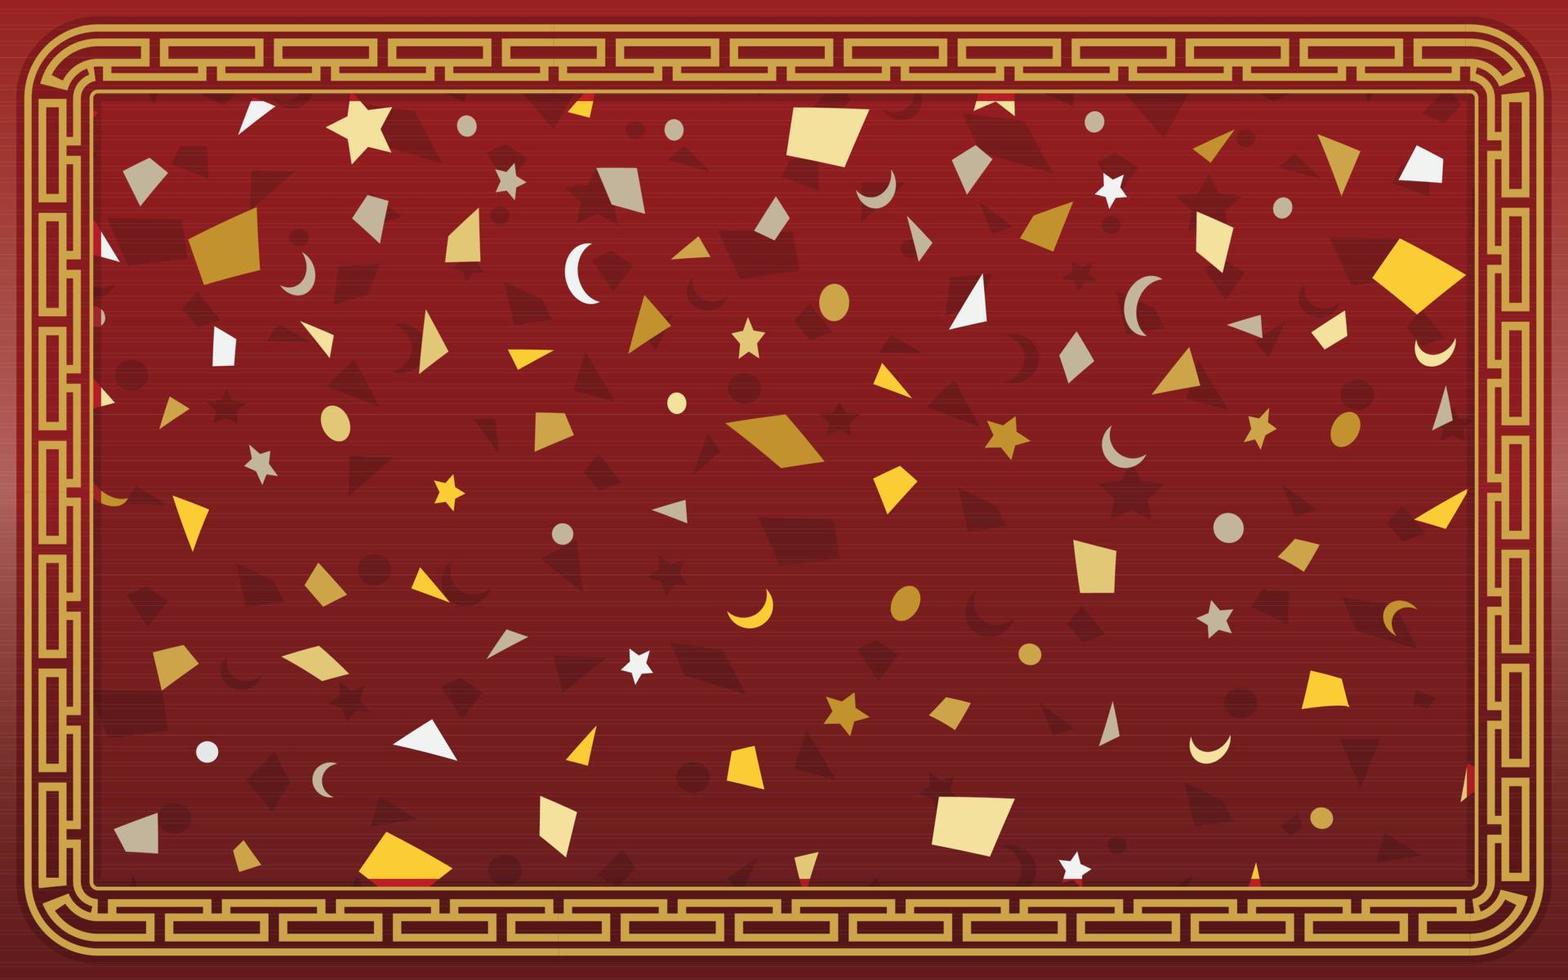 Background illustration for designing online signs or banners for Chinese New Year vector